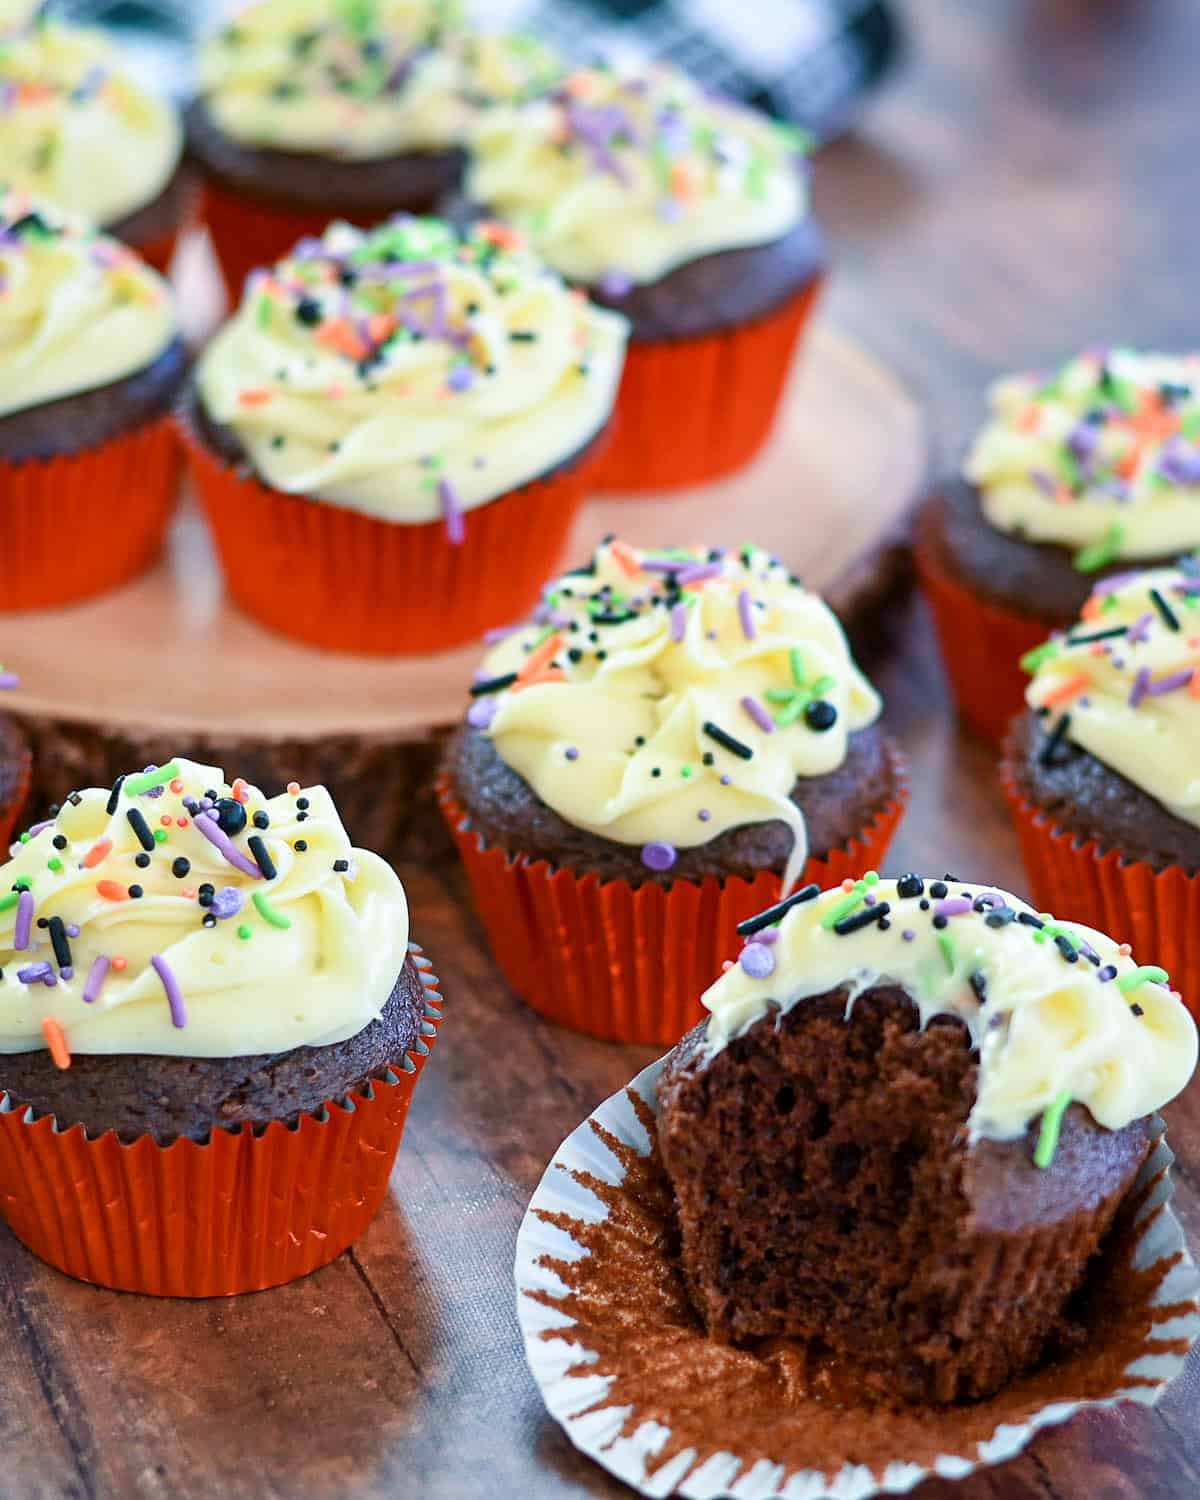 Chocolate cupcakes with butter frosting topped with colorful sprinkles.